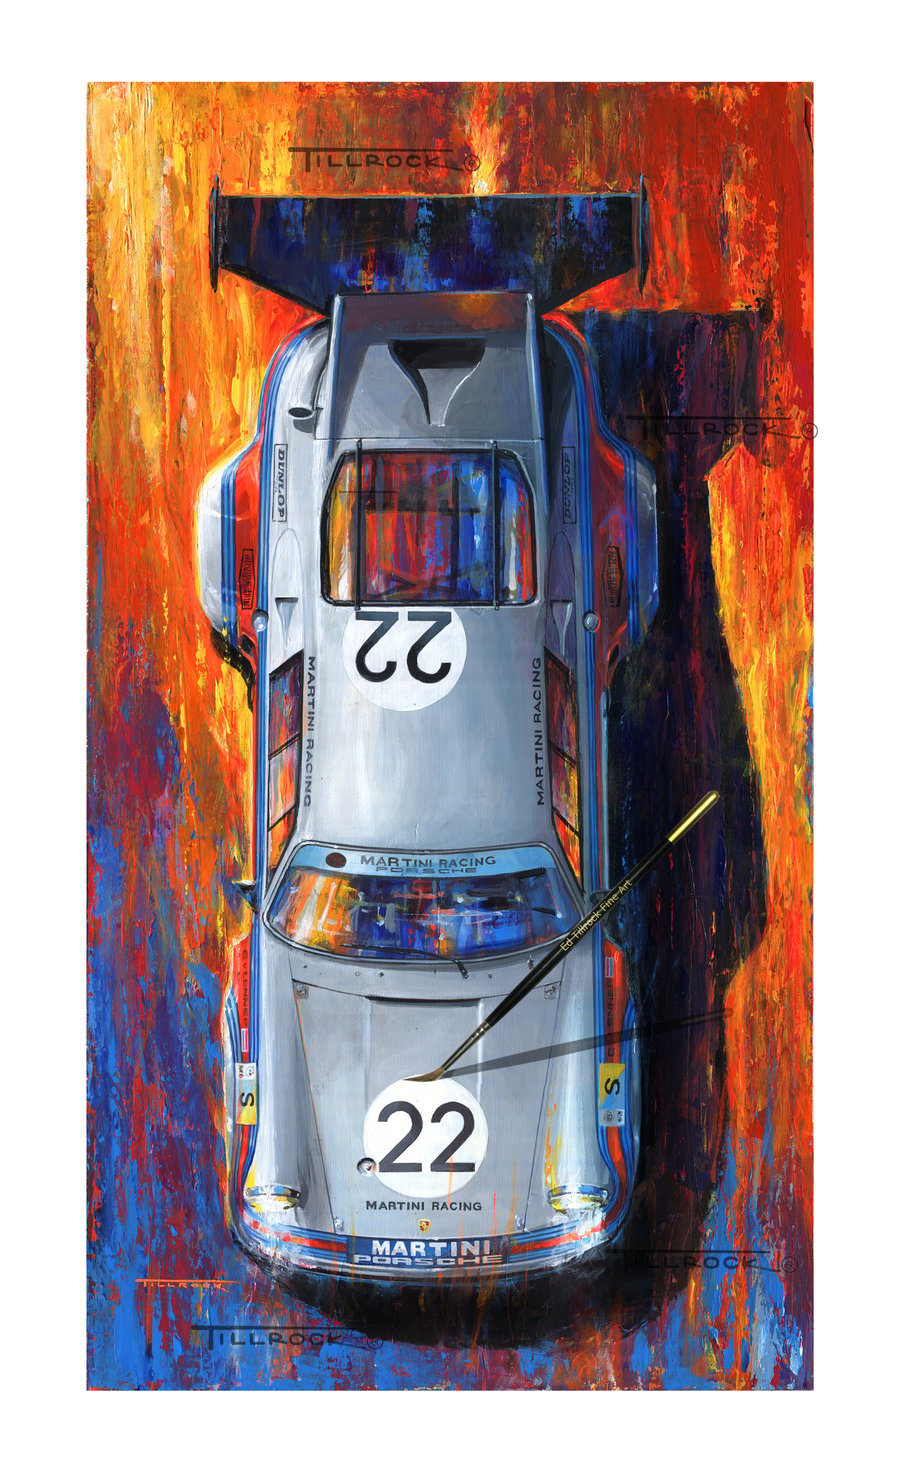 Image of 1974 Porsche 911 Carrera RSR Turbo (22"x36") Signed & Numbered Giclee' Print